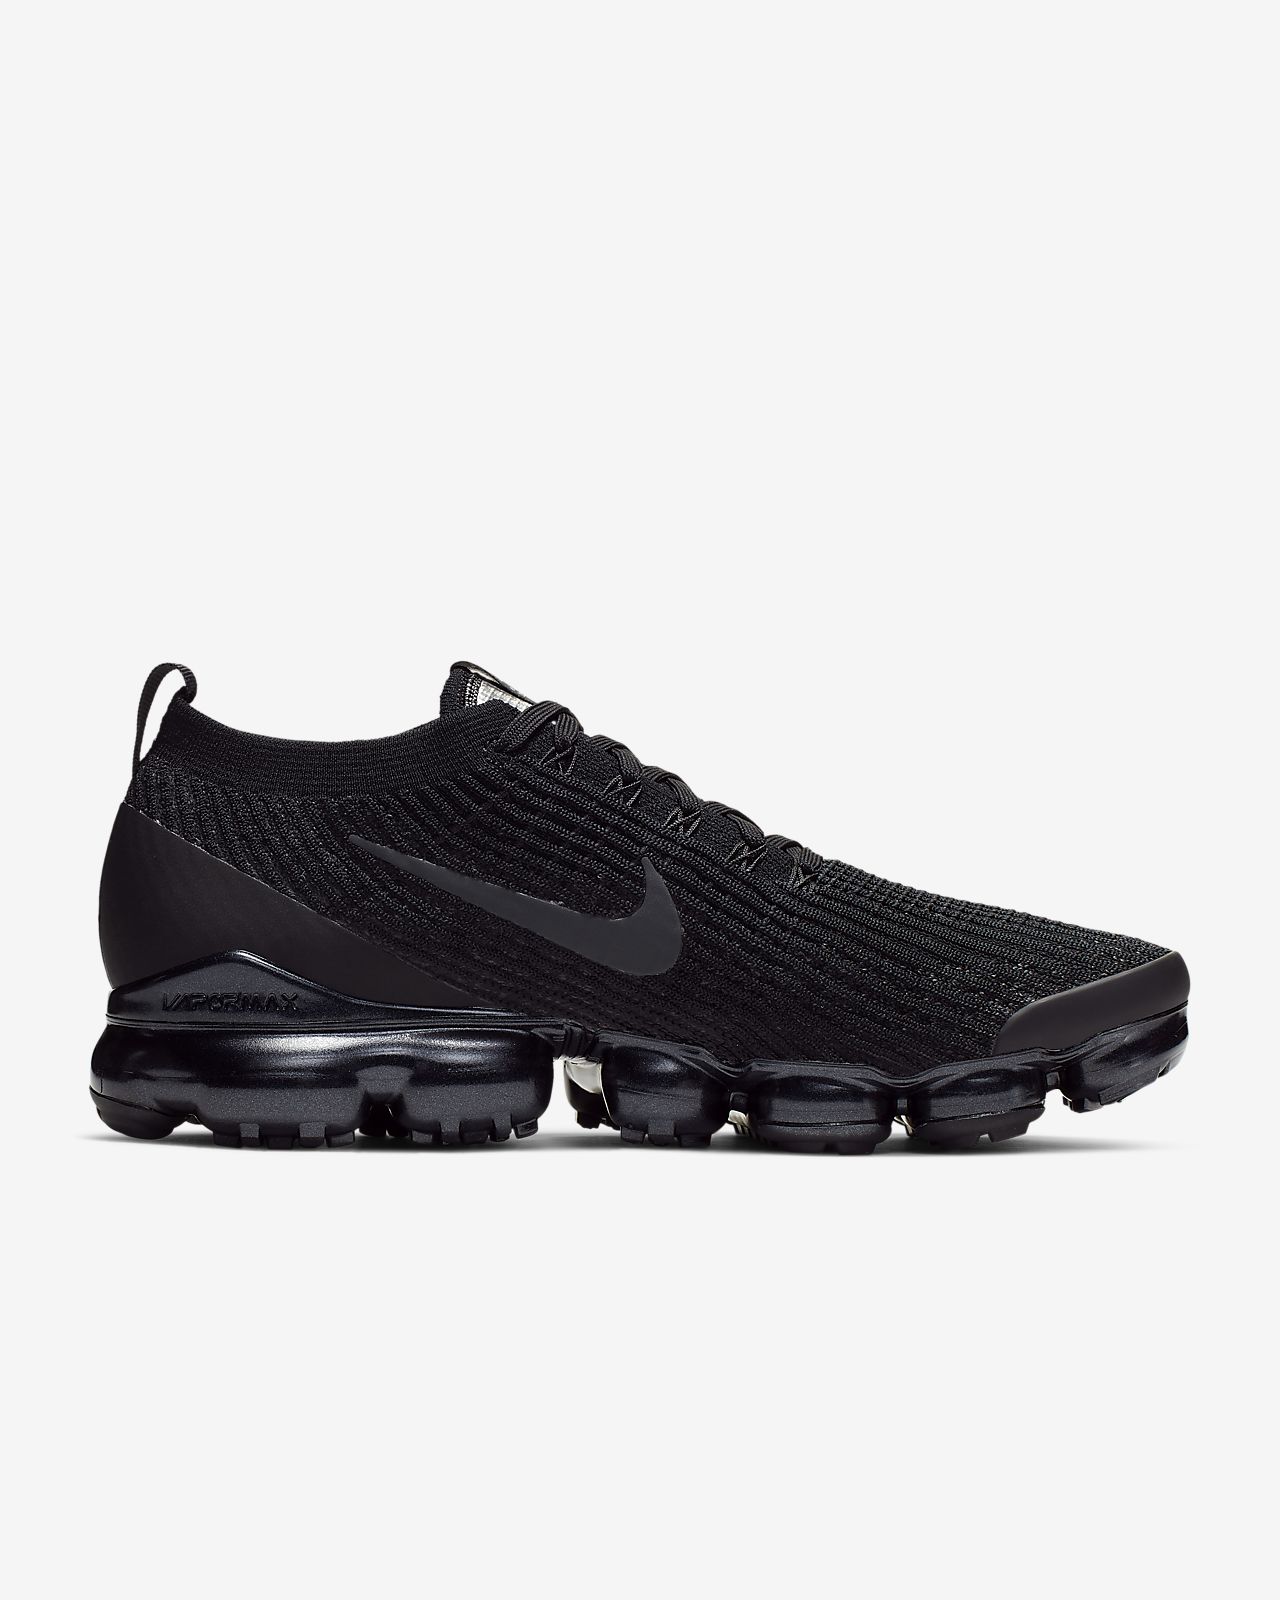 nike vapormax without laces sort best 